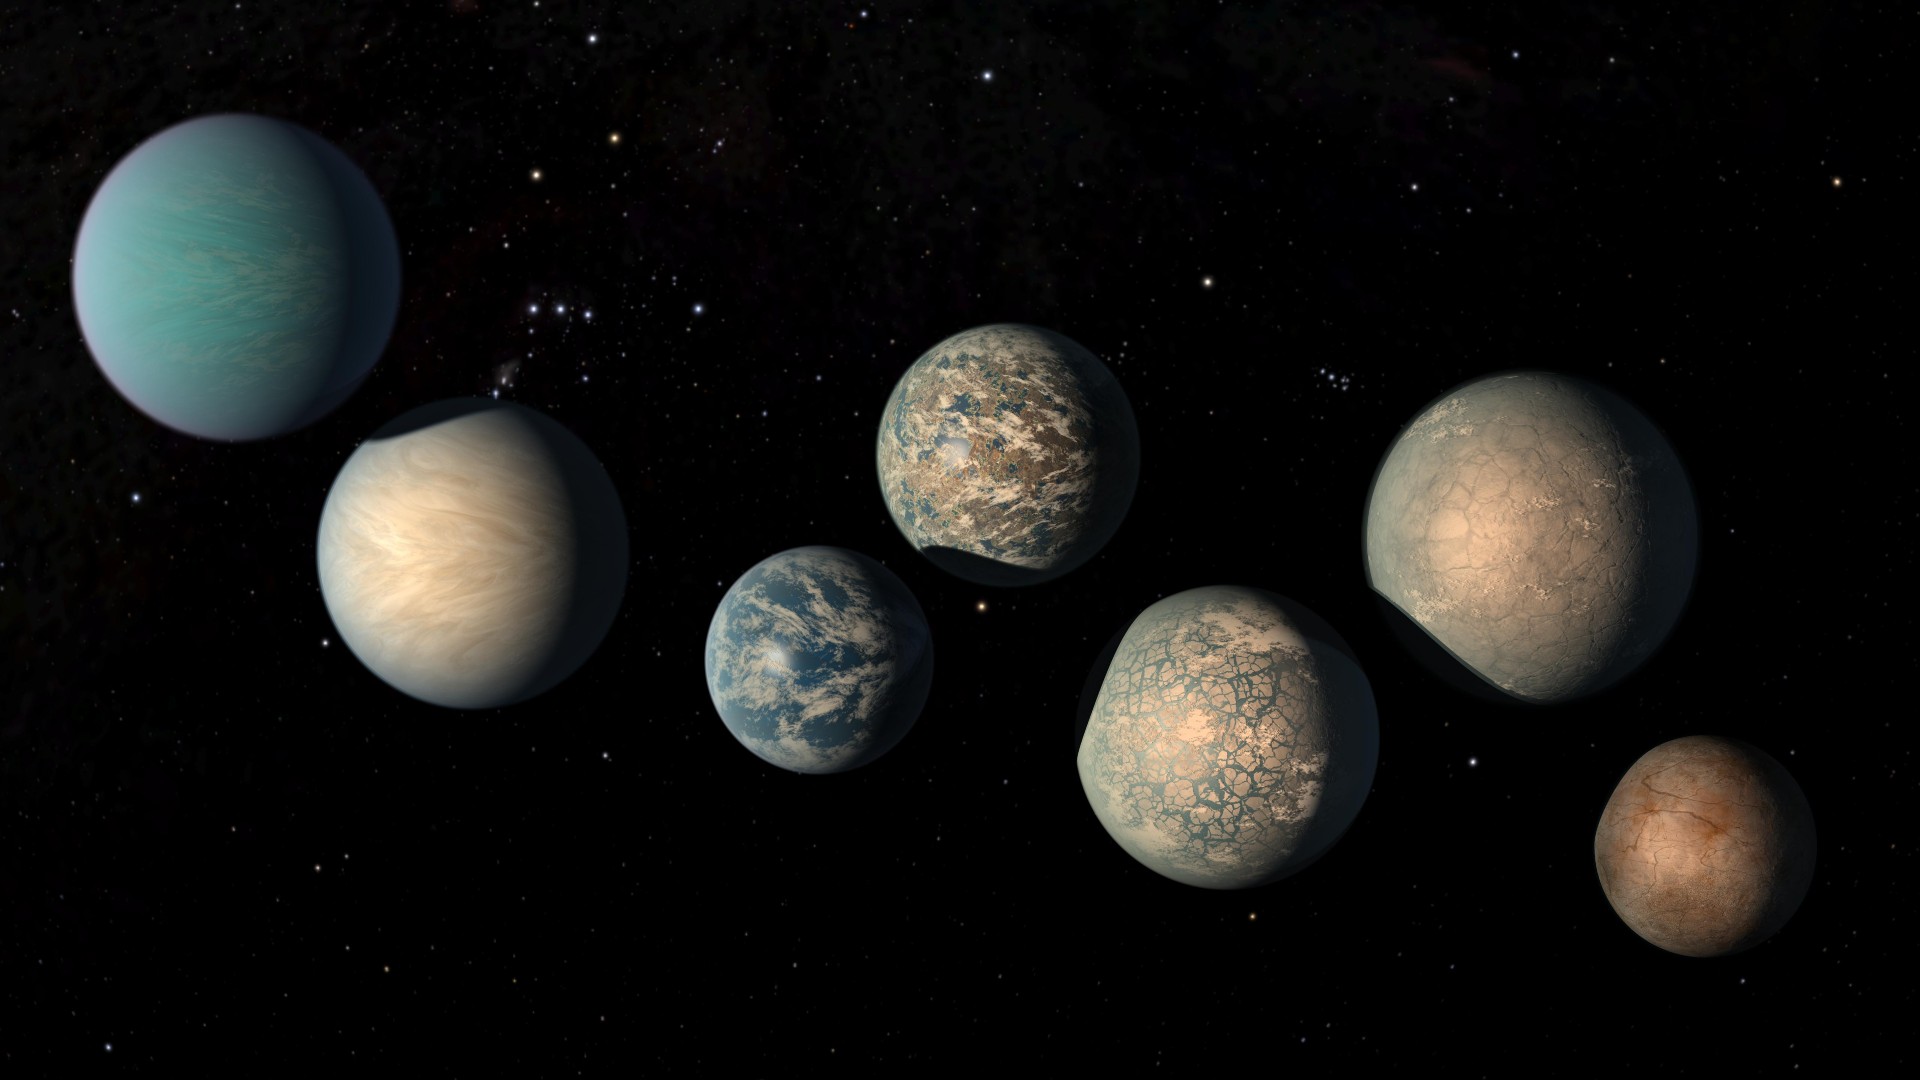 Illustration of TRAPPIST-1 Planets as of Feb.  2018. There are 7 planets of similar sizes against a black background.